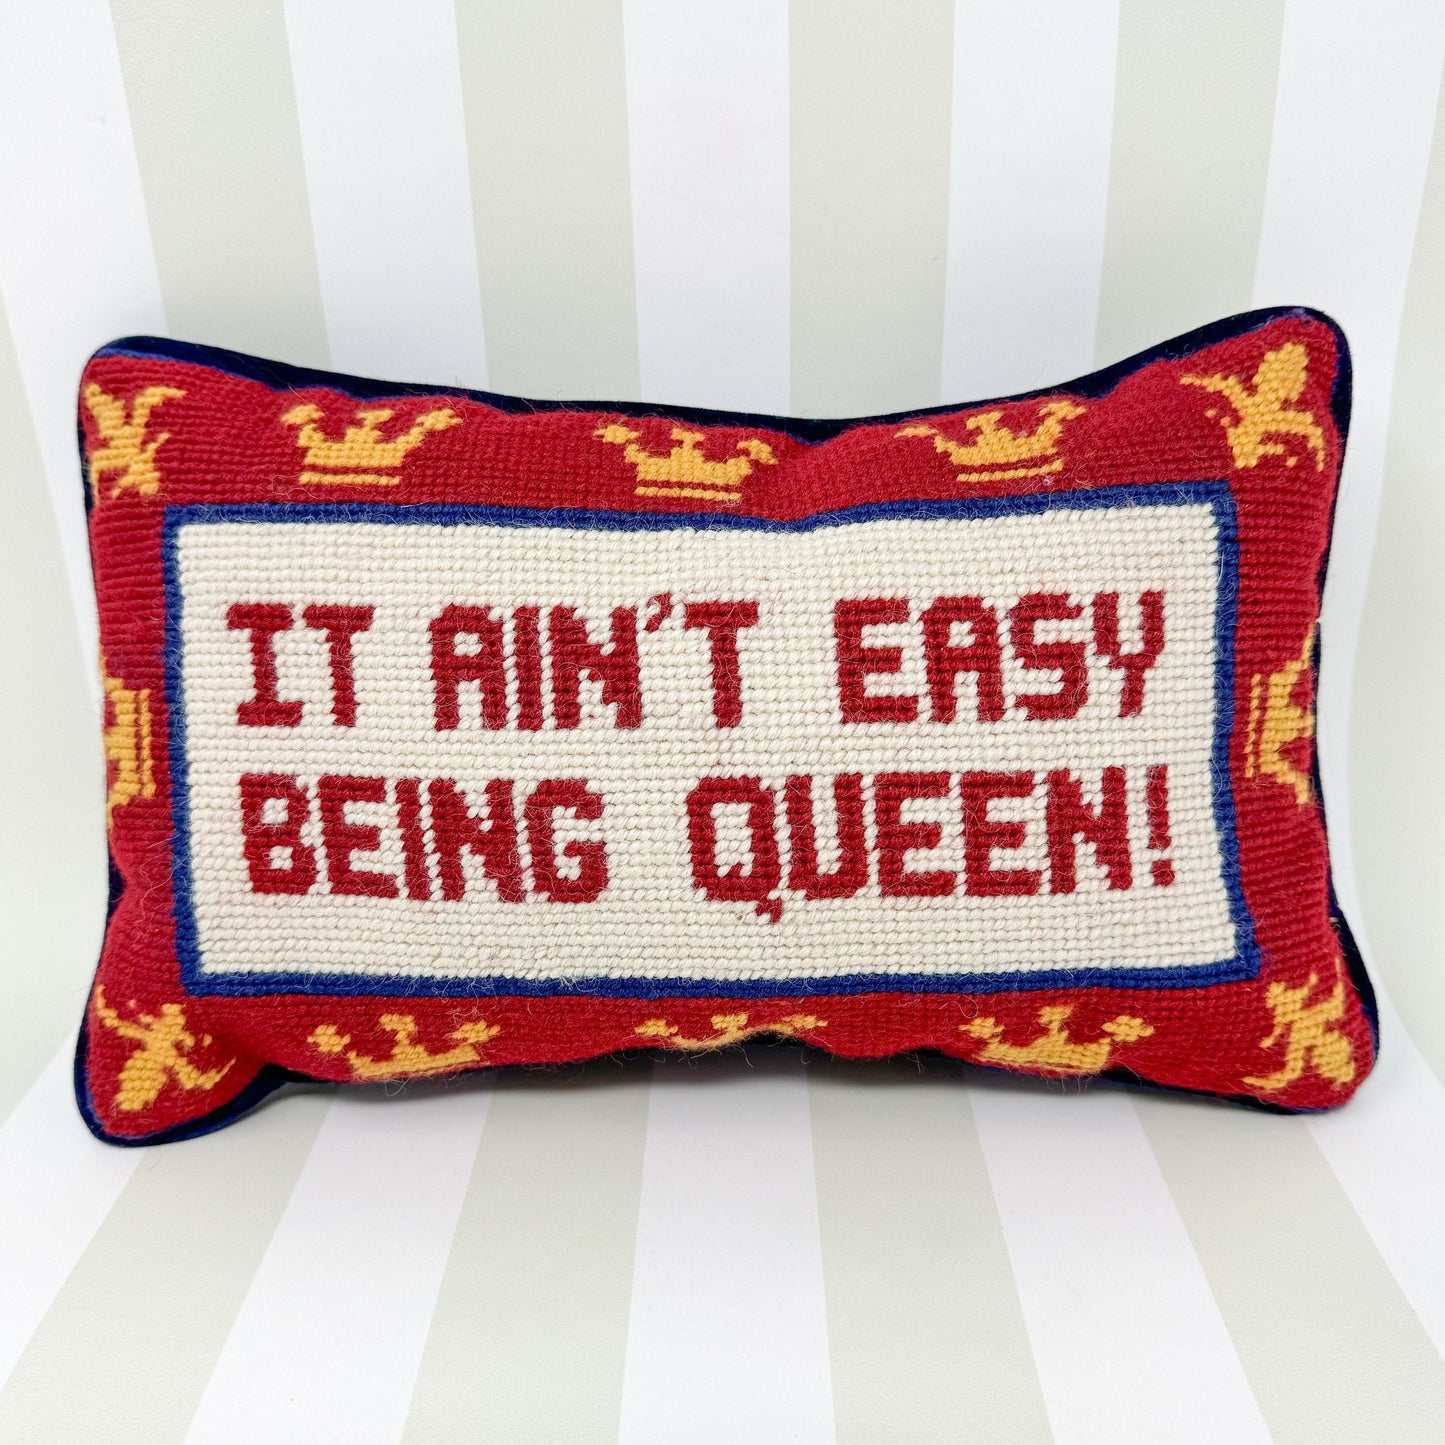 It Ain't Easy Being Queen - Cheeky Vintage Needlepoint Pillow